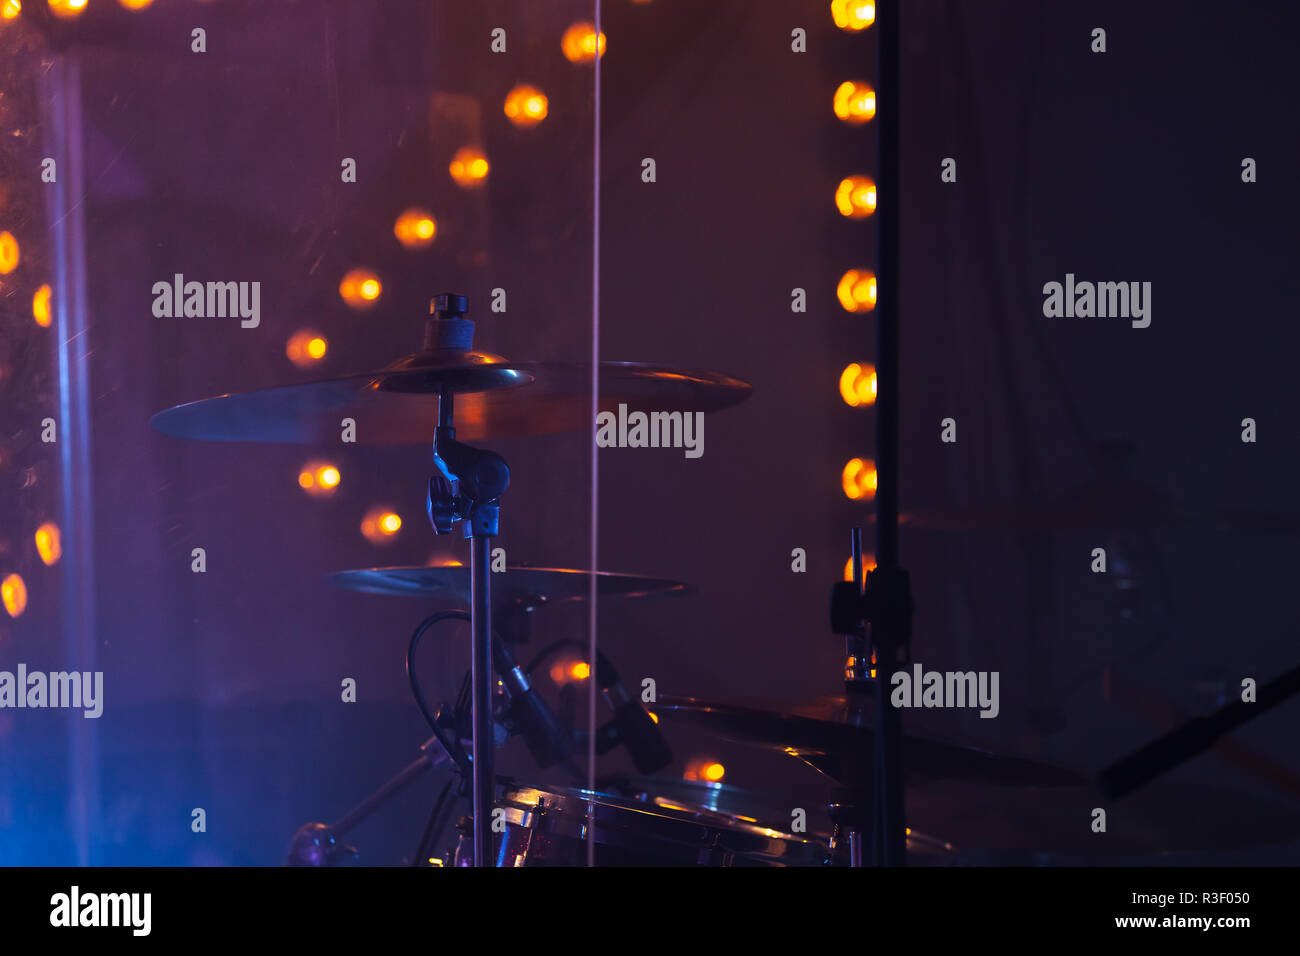 Live rock music photo background, rock drum set  with cymbals in dark stage lights. Close-up photo, soft selective focus Stock Photo